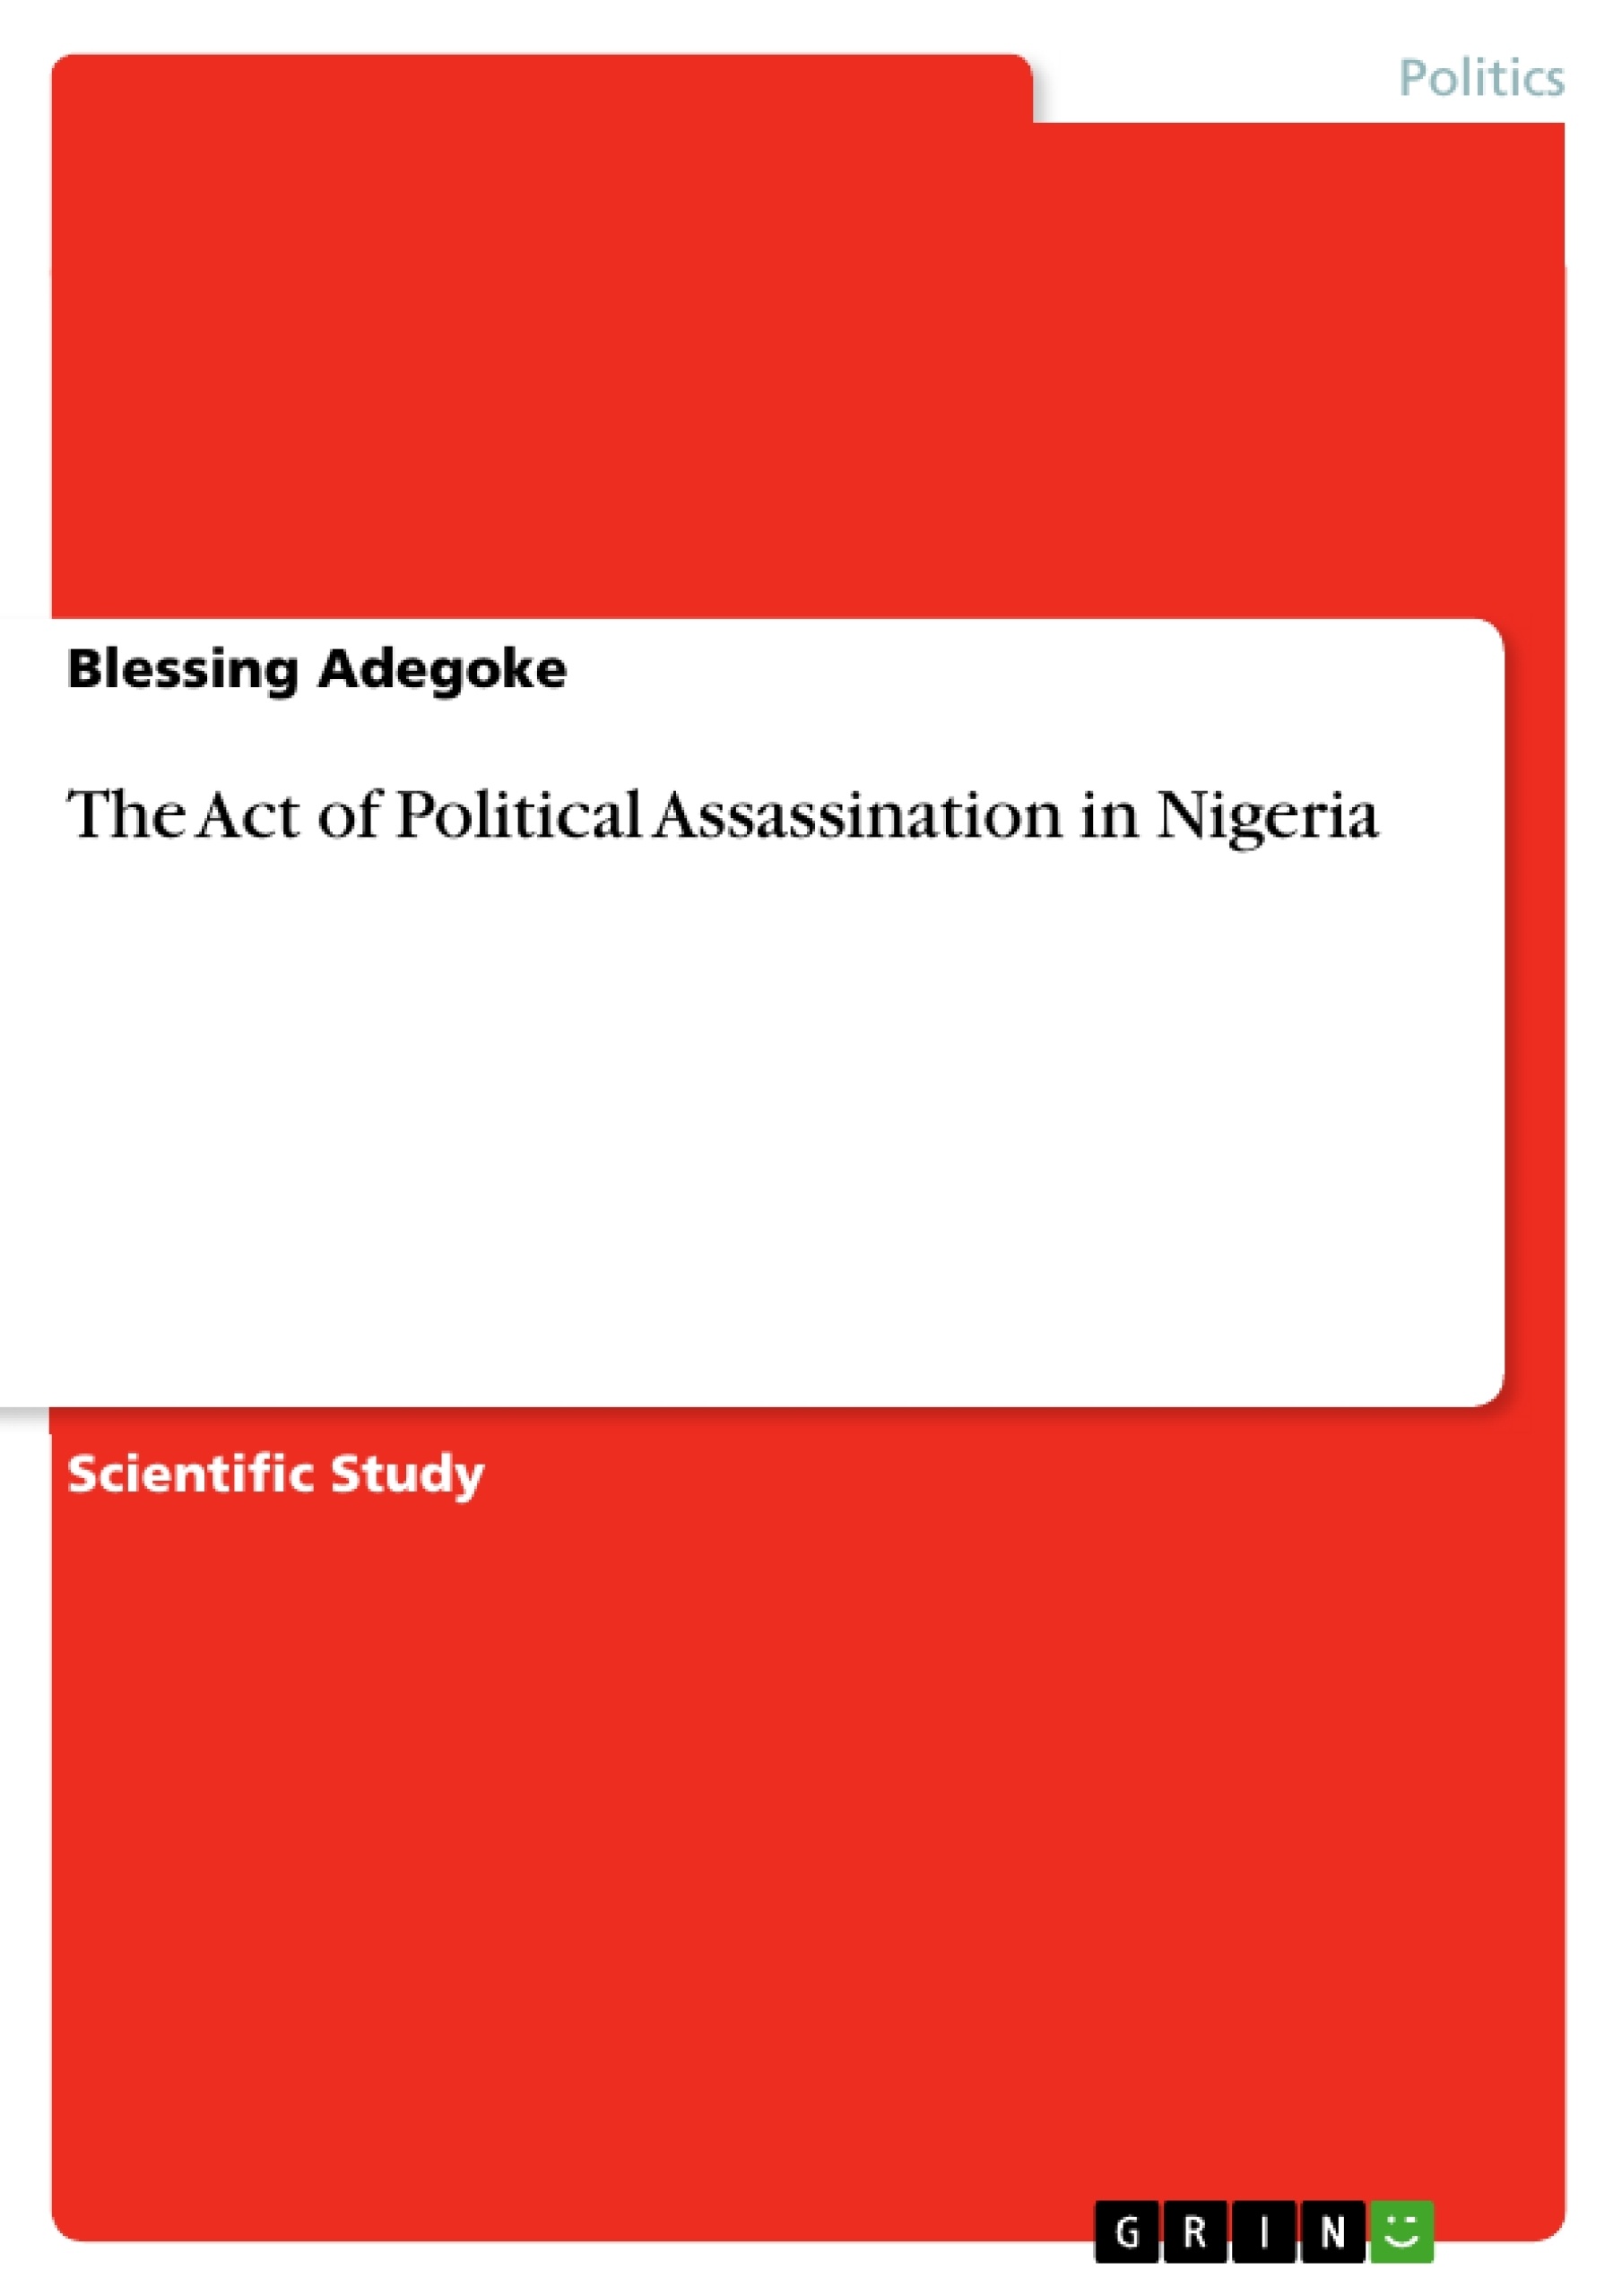 Titre: The Act of Political Assassination in Nigeria